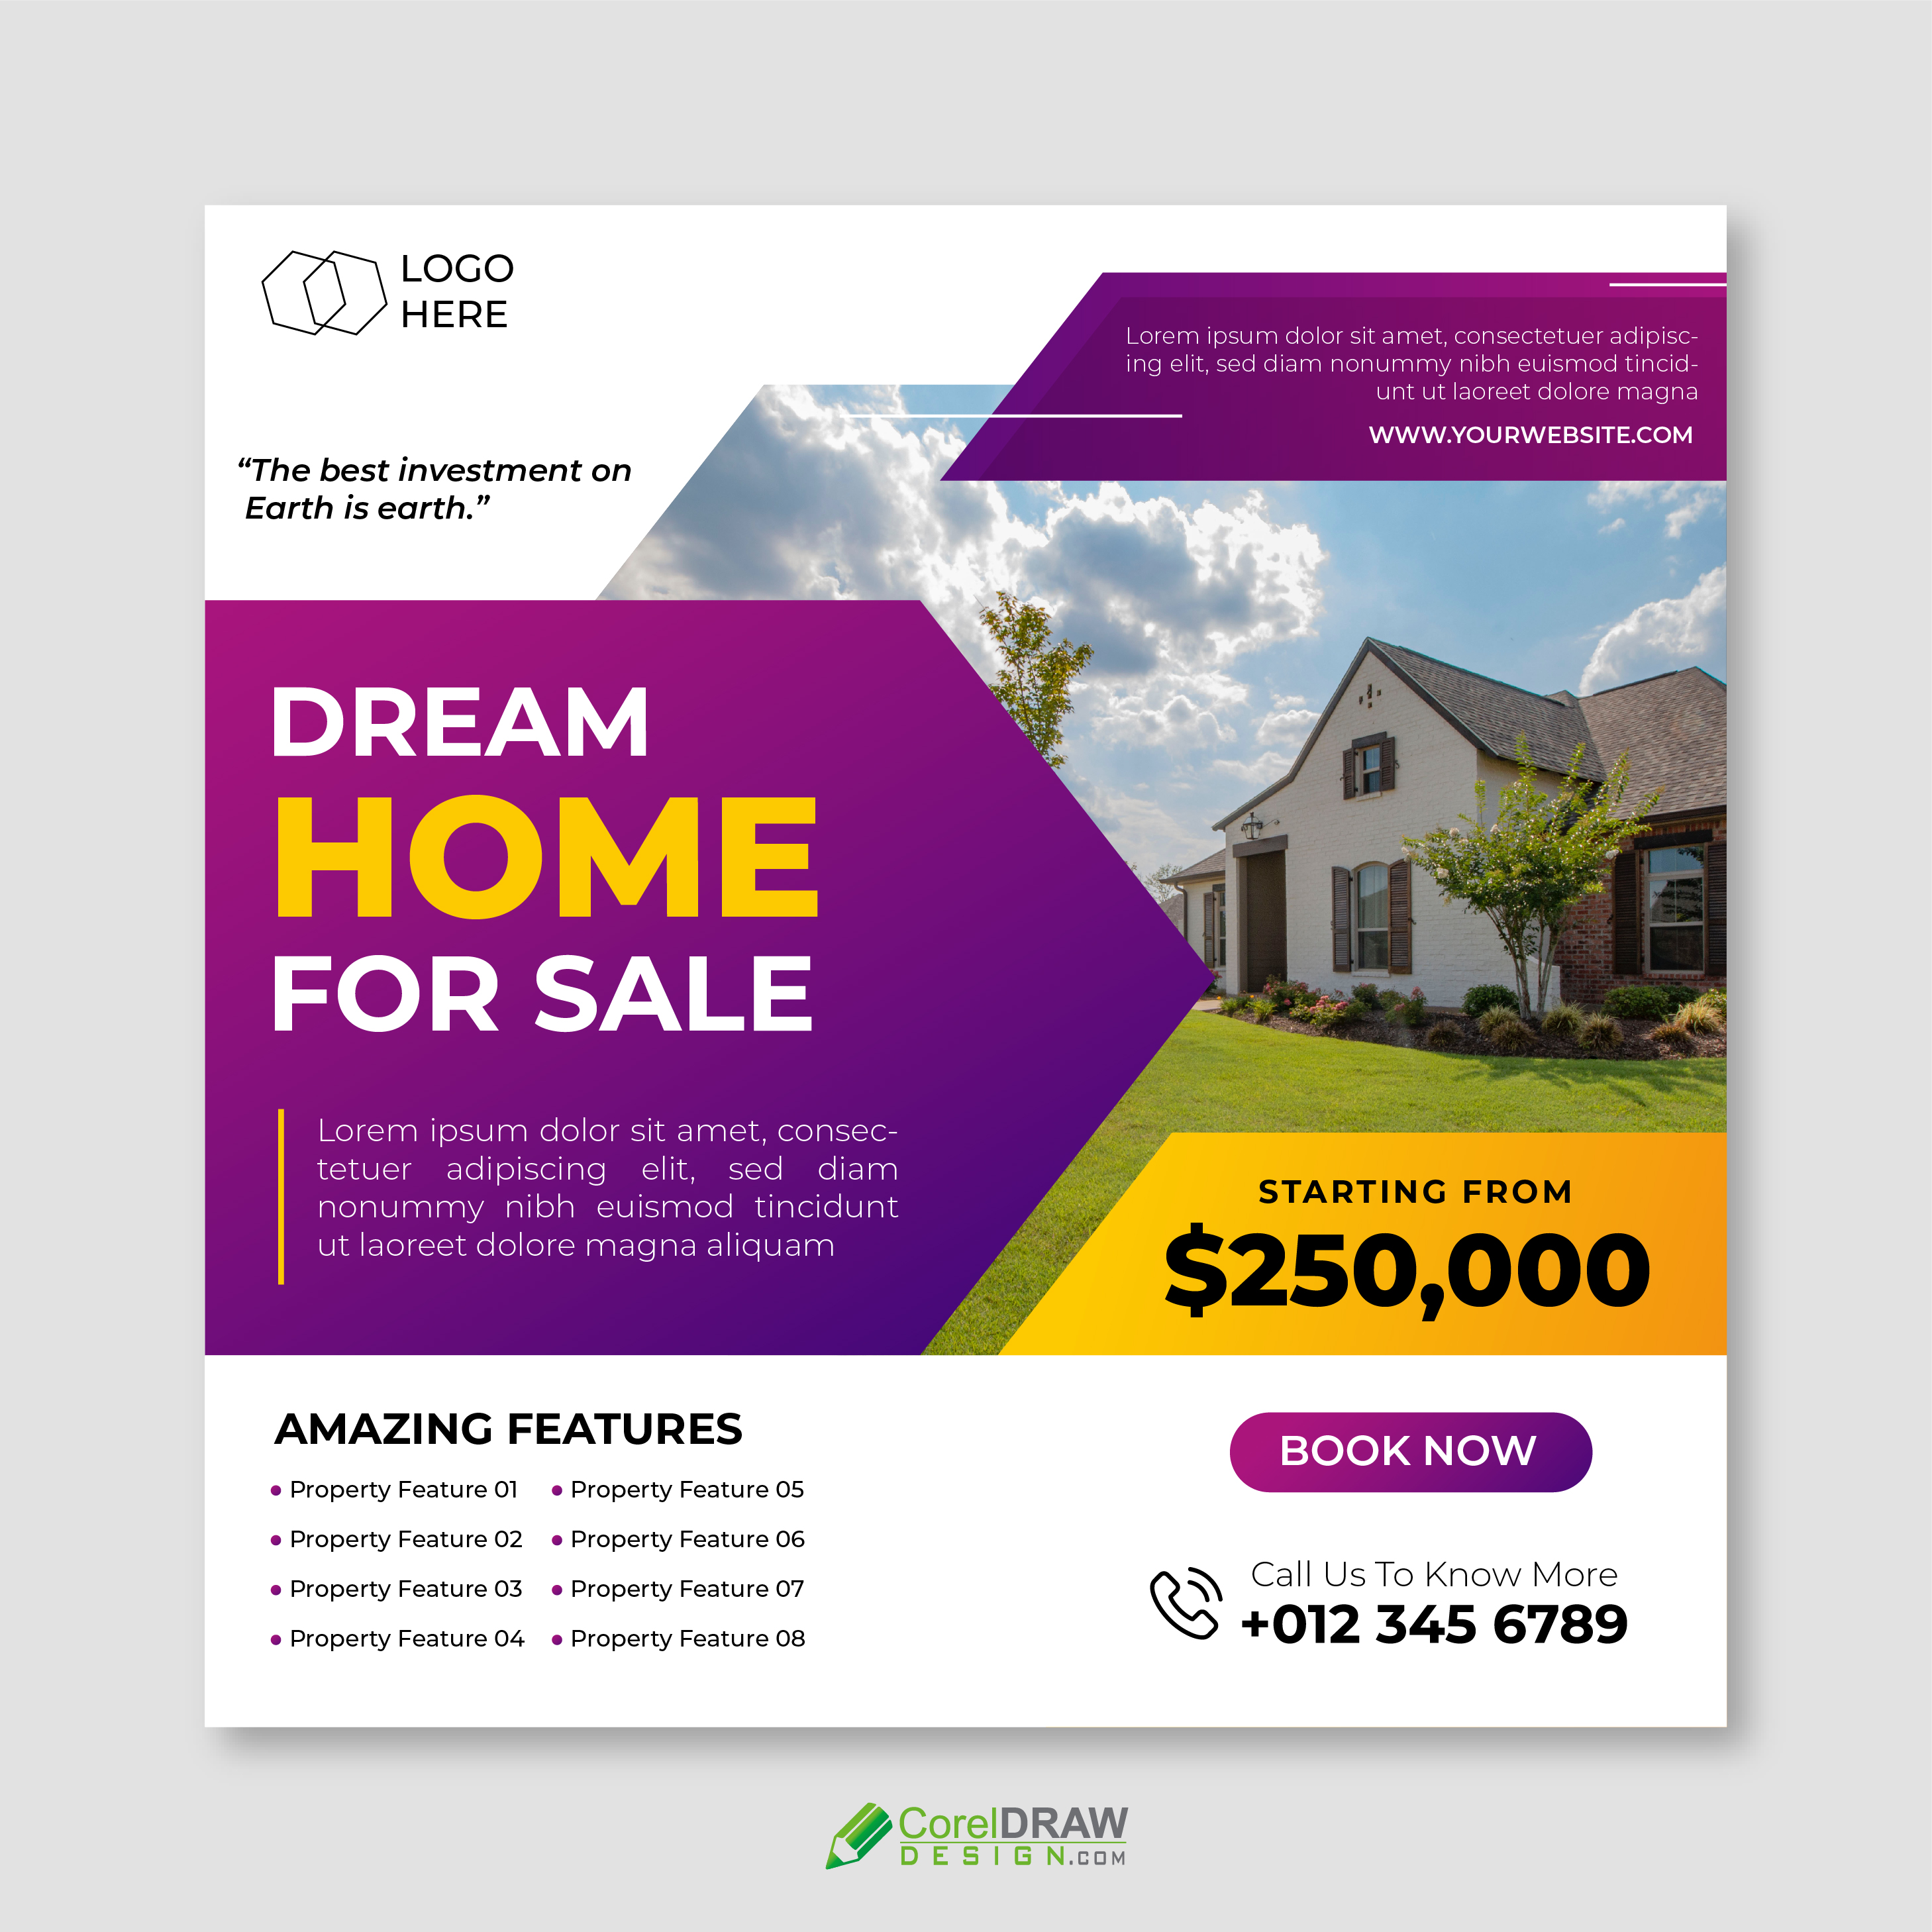 Abstract Corporate Premium Property Real Estate Banner Social Media Template